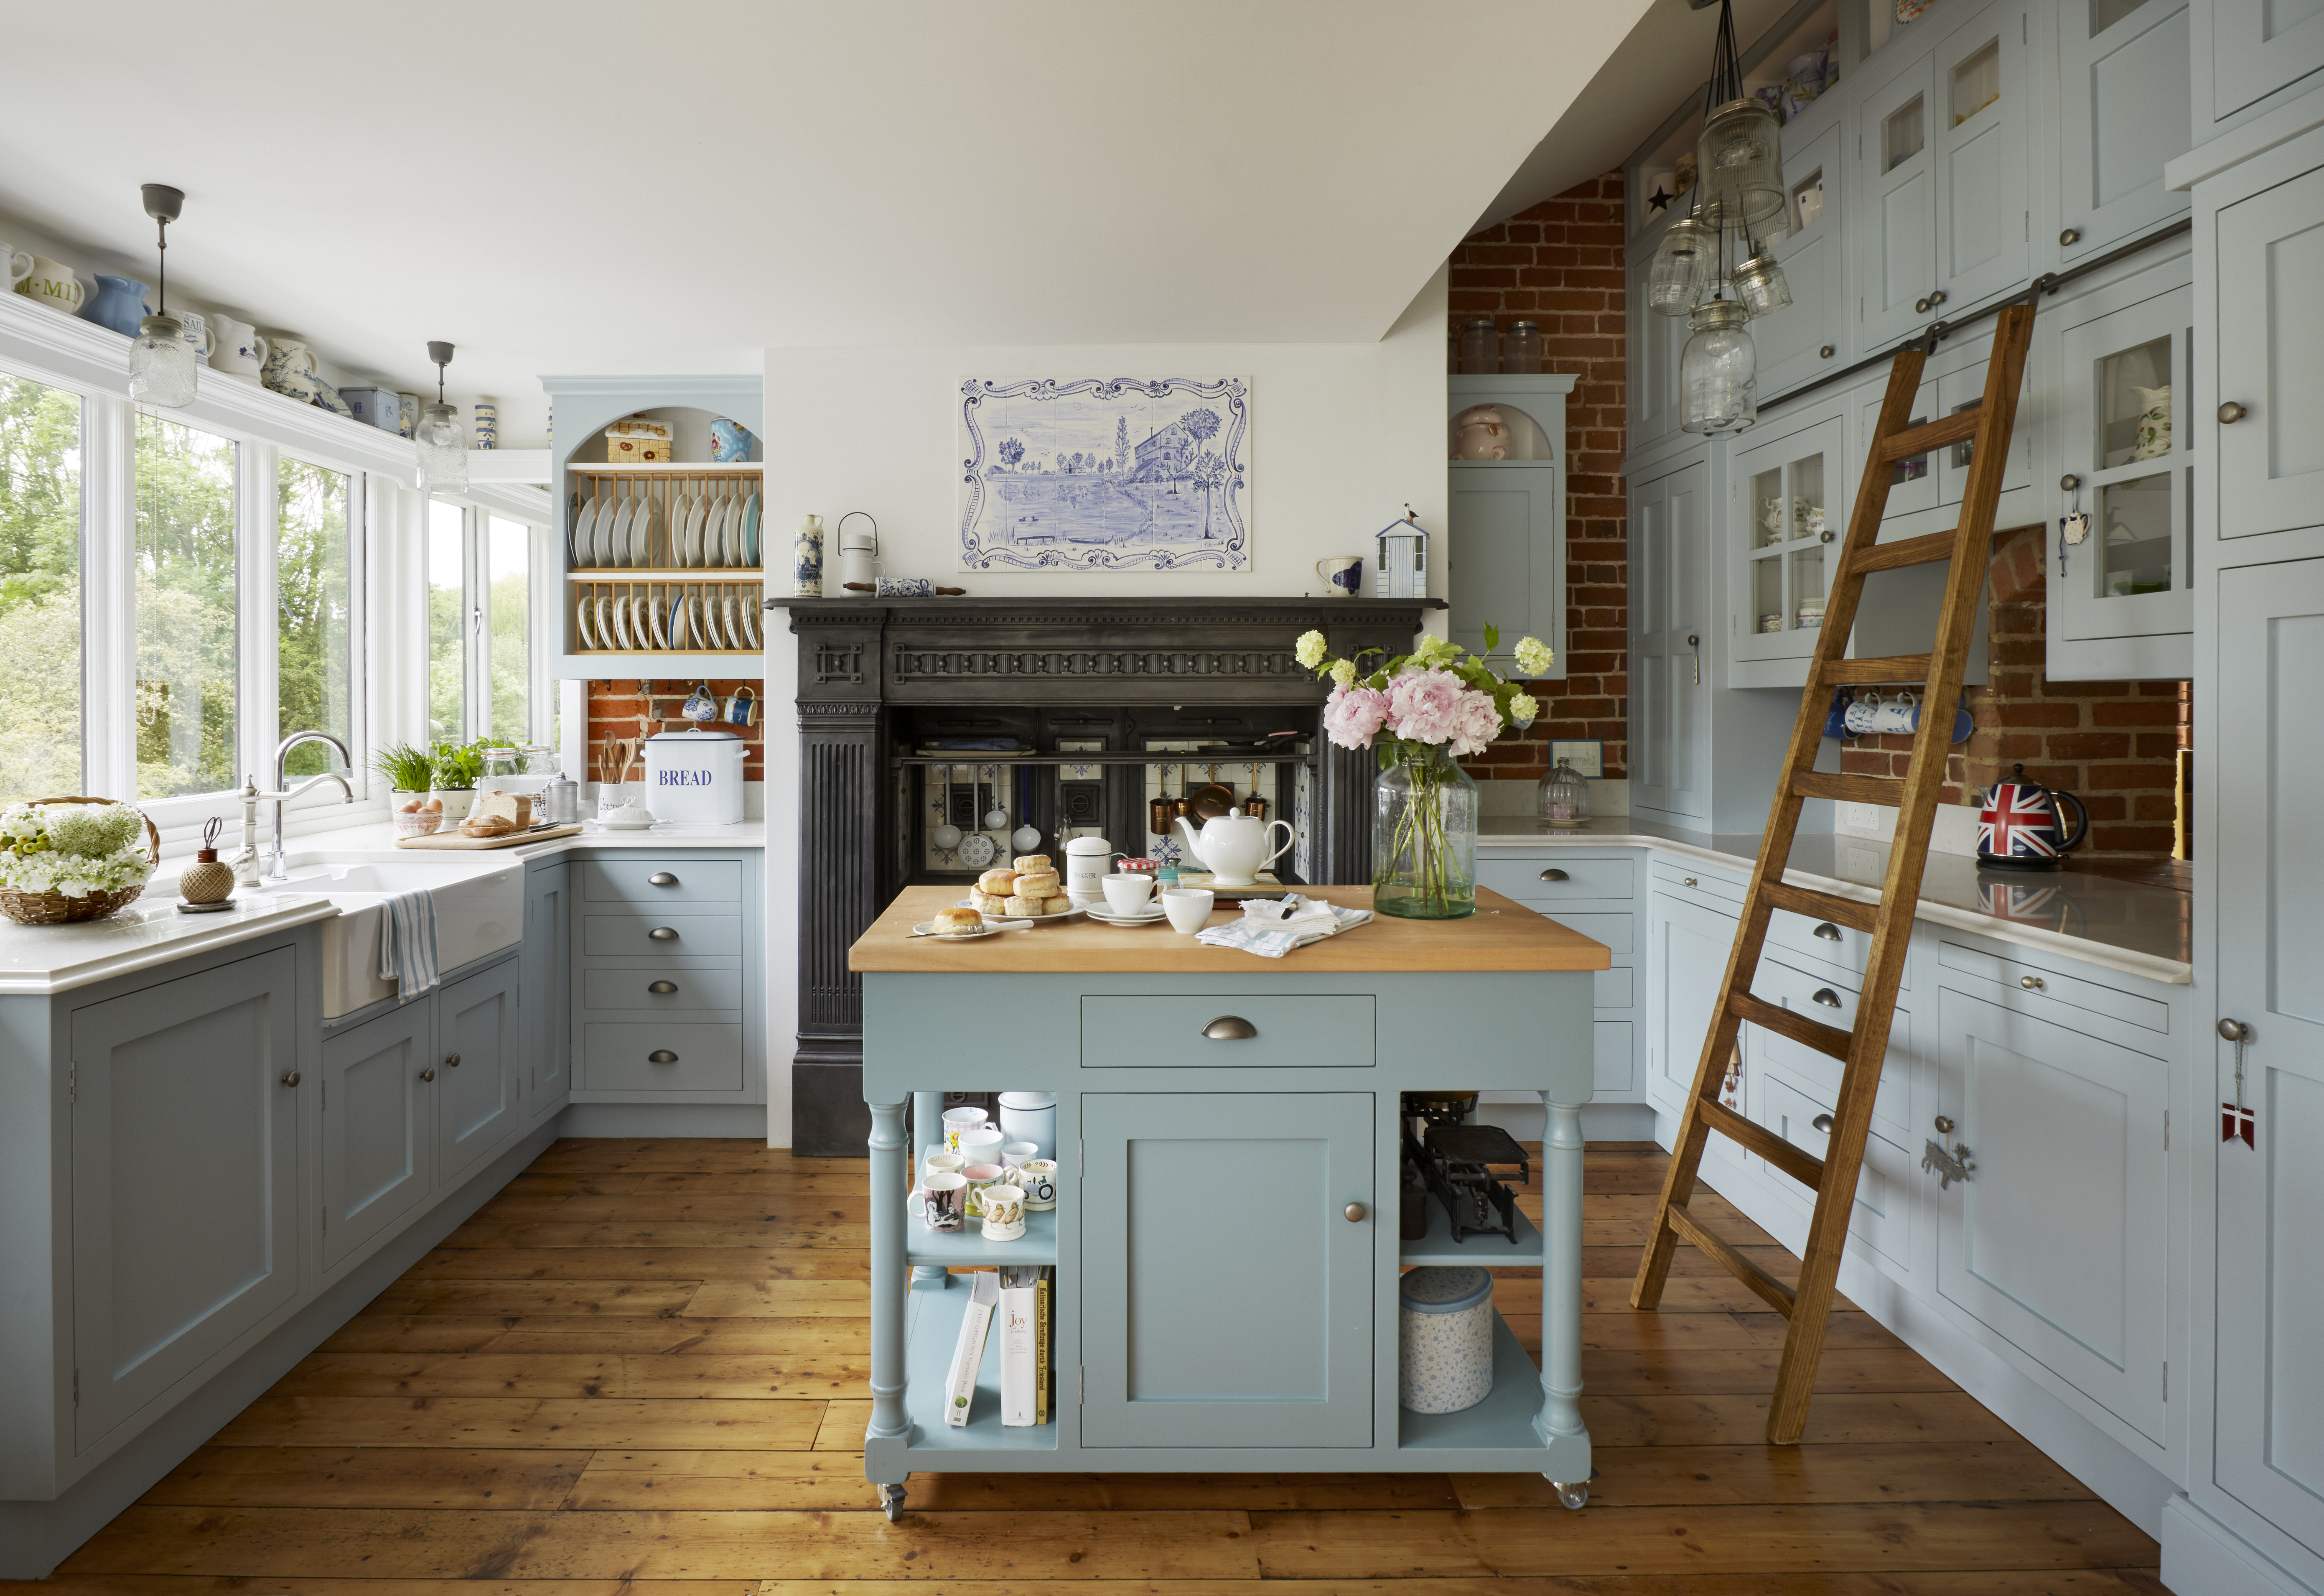 Designing a farmhouse kitchen 20 ideas that are brimming with ...